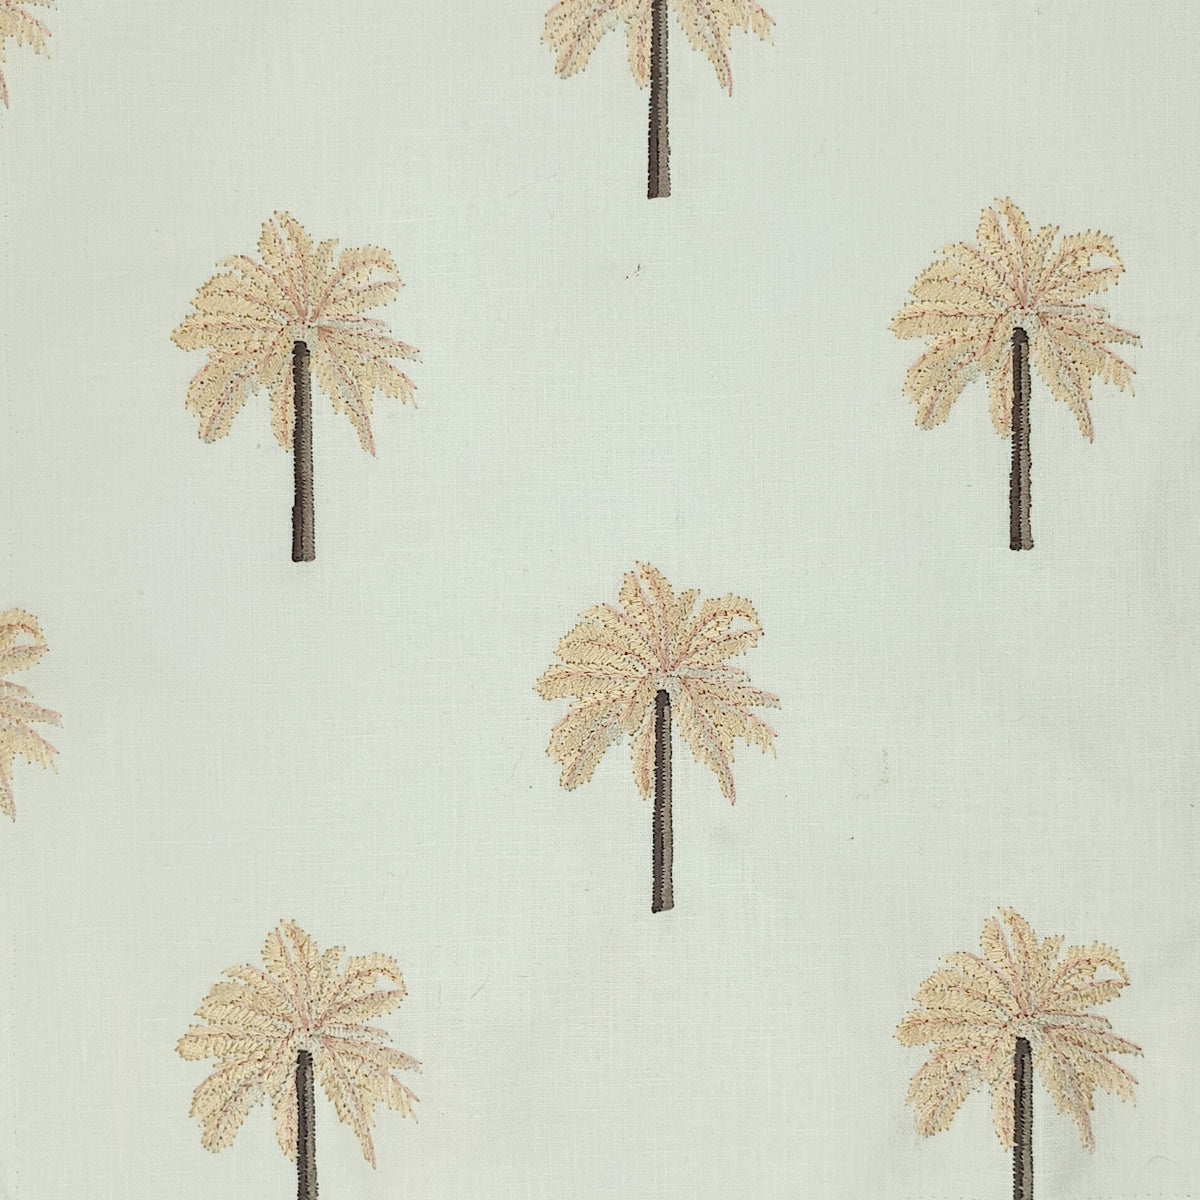 Embroidered Palm Trees Decor Fabric Delray Blush